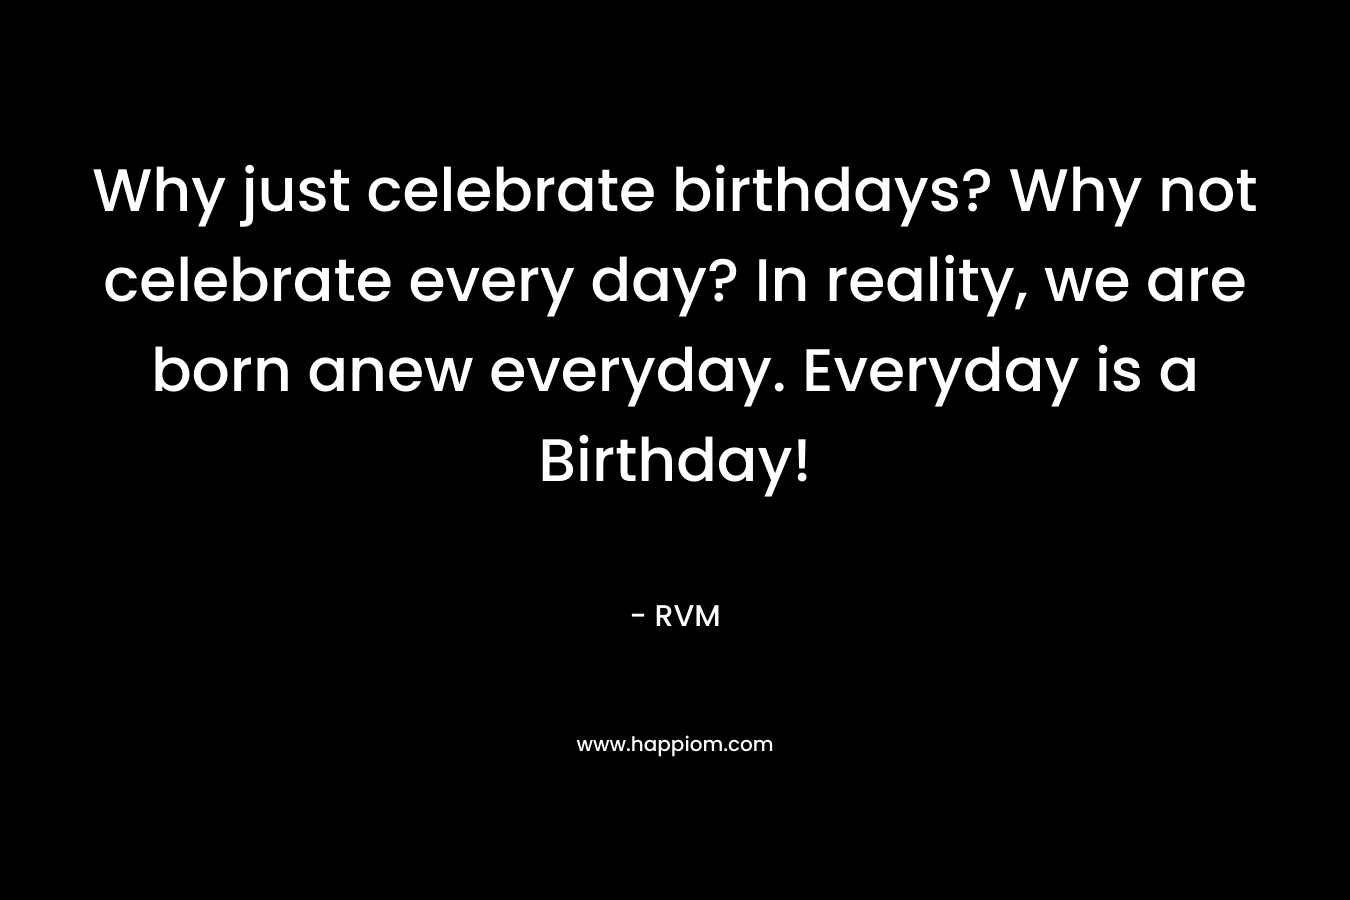 Why just celebrate birthdays? Why not celebrate every day? In reality, we are born anew everyday. Everyday is a Birthday!